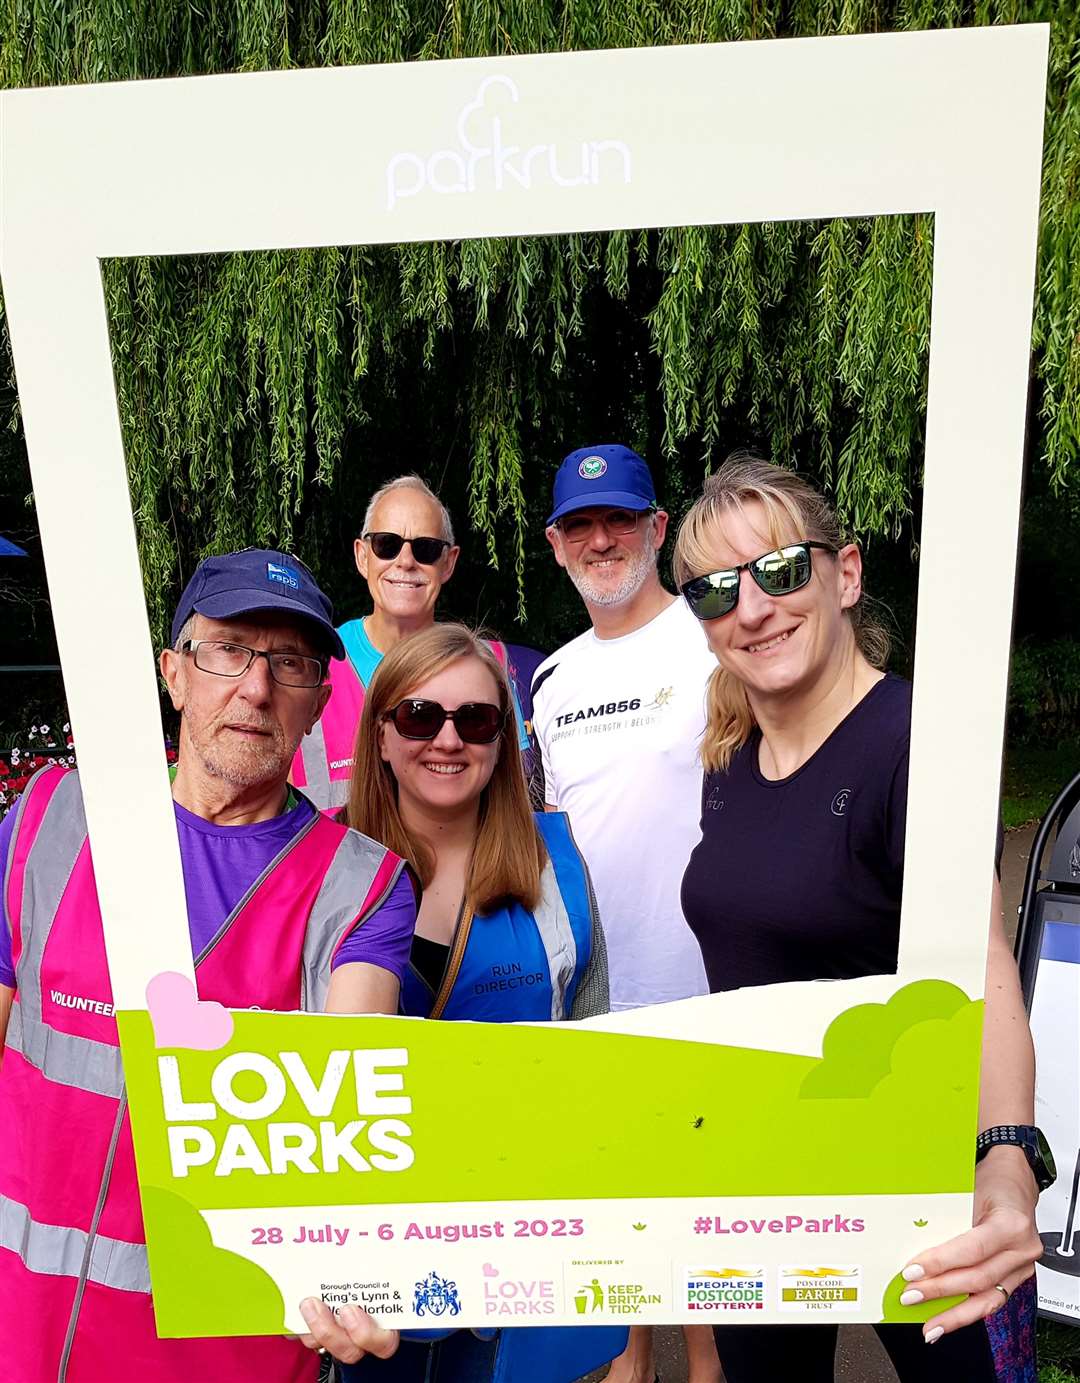 The Core Team members for the King’s Lynn Parkrun. Photo shows L to R: Mick Ennis, Gary Walker, Hannah Fisher, Jon Plumb and Juith Berry. Photo credit: Gary Walker.